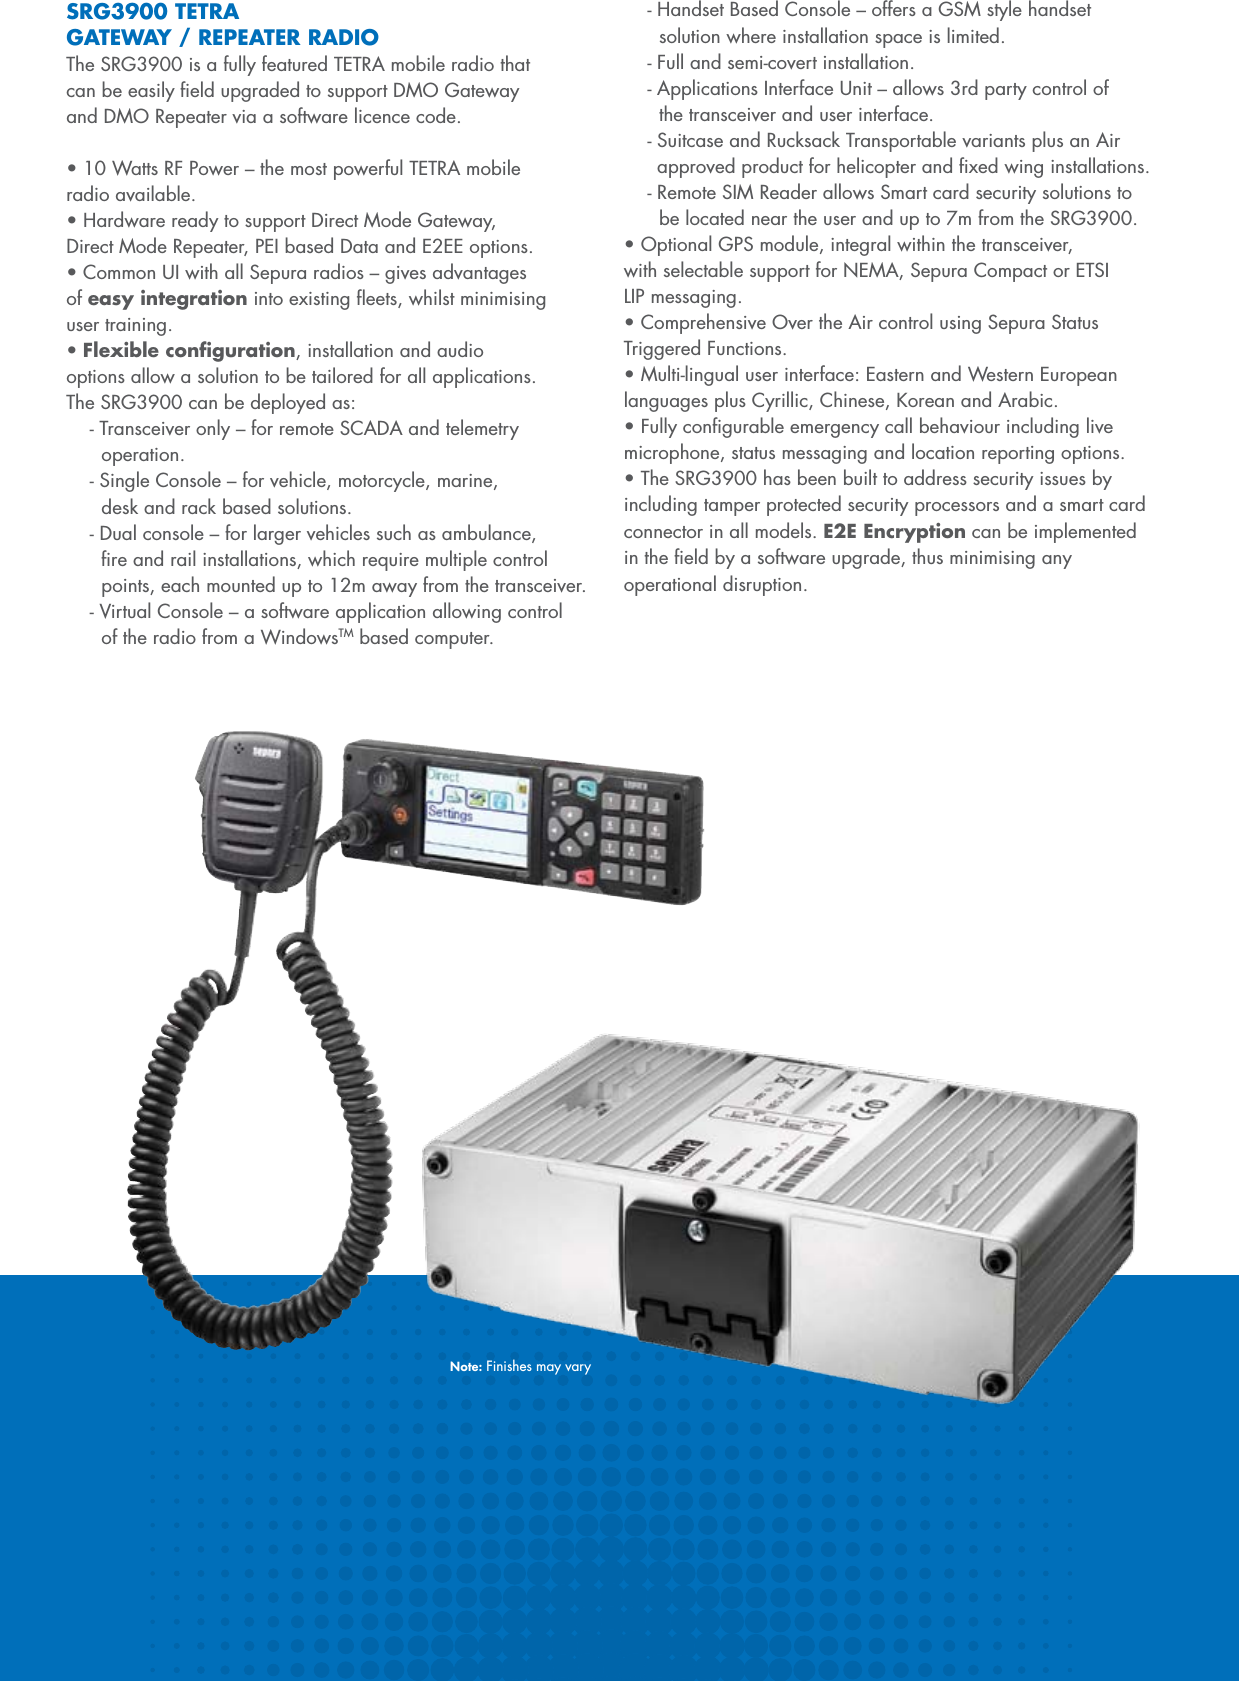 SRG3900 TETRA GATEWAY / REPEATER RADIOThe SRG3900 is a fully featured TETRA mobile radio that can be easily ﬁeld upgraded to support DMO Gateway and DMO Repeater via a software licence code. •10WattsRFPower–themostpowerfulTETRAmobile radio available.•HardwarereadytosupportDirectModeGateway,Direct Mode Repeater, PEI based Data and E2EE options.•CommonUIwithallSepuraradios–givesadvantagesof easy integrationintoexistingeets,whilstminimisinguser training.•Flexible conﬁguration, installation and audio options allow a solution to be tailored for all applications. The SRG3900 can be deployed as:- Transceiver only – for remote SCADA and telemetry   operation.- Single Console – for vehicle, motorcycle, marine,    desk and rack based solutions.- Dual console – for larger vehicles such as ambulance,   ﬁre and rail installations, which require multiple control    points, each mounted up to 12m away from the transceiver.- Virtual Console – a software application allowing control   of the radio from a WindowsTM based computer.- Handset Based Console – offers a GSM style handset   solution where installation space is limited.- Full and semi-covert installation.- Applications Interface Unit – allows 3rd party control of   the transceiver and user interface.- Suitcase and Rucksack Transportable variants plus an Air   approved product for helicopter and ﬁxed wing installations.- Remote SIM Reader allows Smart card security solutions to    be located near the user and up to 7m from the SRG3900.•OptionalGPSmodule,integralwithinthetransceiver,with selectable support for NEMA, Sepura Compact or ETSI LIP messaging.•ComprehensiveOvertheAircontrolusingSepuraStatusTriggered Functions.•Multi-lingualuserinterface:EasternandWesternEuropeanlanguages plus Cyrillic, Chinese, Korean and Arabic.•Fullycongurableemergencycallbehaviourincludinglivemicrophone, status messaging and location reporting options.•TheSRG3900hasbeenbuilttoaddresssecurityissuesbyincluding tamper protected security processors and a smart card connector in all models. E2E Encryption can be implemented in the ﬁeld by a software upgrade, thus minimising any operational disruption.Note: Finishes may vary